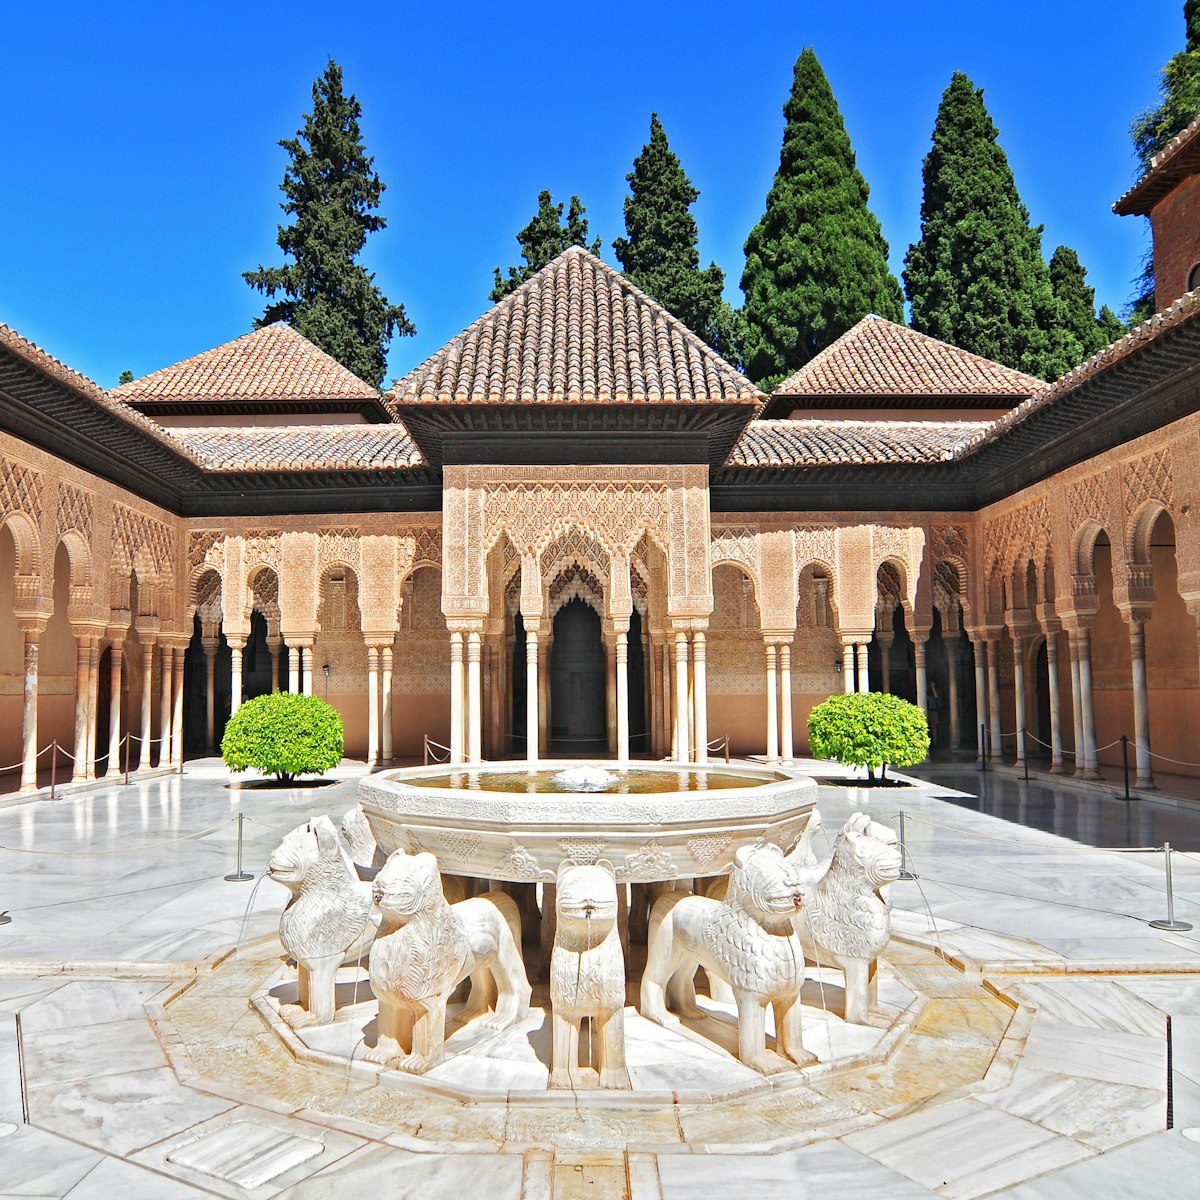 July 1, 2014: Patio de los Leones (Patio of the Lions) at Palacios Nazaries in the Alhambra.
582611728
alhambra, andalucia, andalucian, andalusian, arches, architecture, buildings, columns, court, courtyard, decorative, europe, european, fountain, granada, harem, historic, los, marble, mediterranean, moor, moorish, nasrid, nazaries, old, ornate, palace, palacios, patio, pillar, sight, skies, south, southern, spain, spanish, sun, sunny, sunshine, traditional, travel, typical, vacation